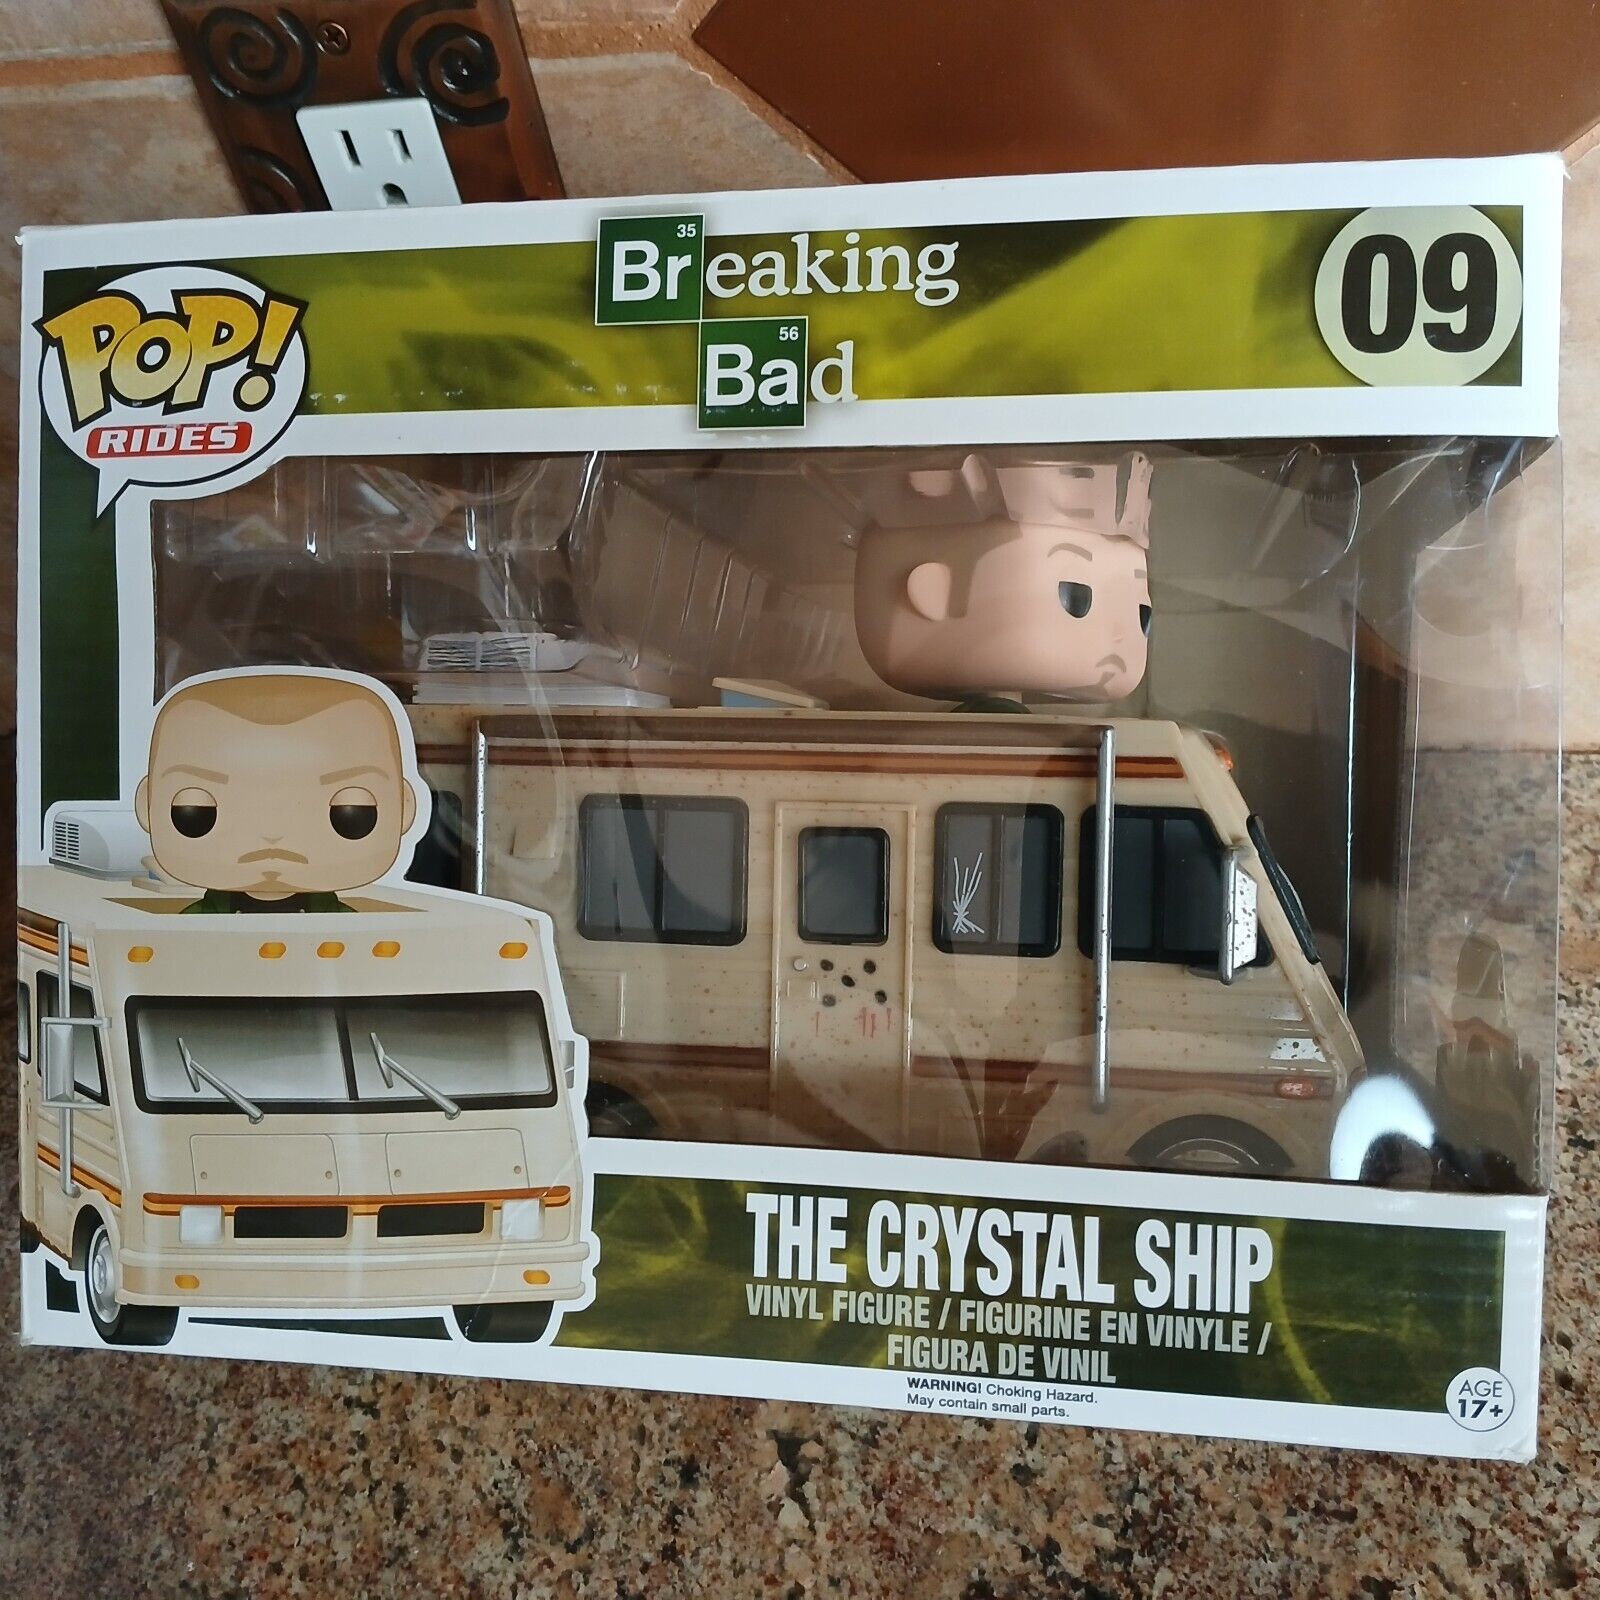 VAULTED Funko POP RIDES Breaking Bad 09 THE CRYSTAL SHIP - Box DAMAGED SEE Pics